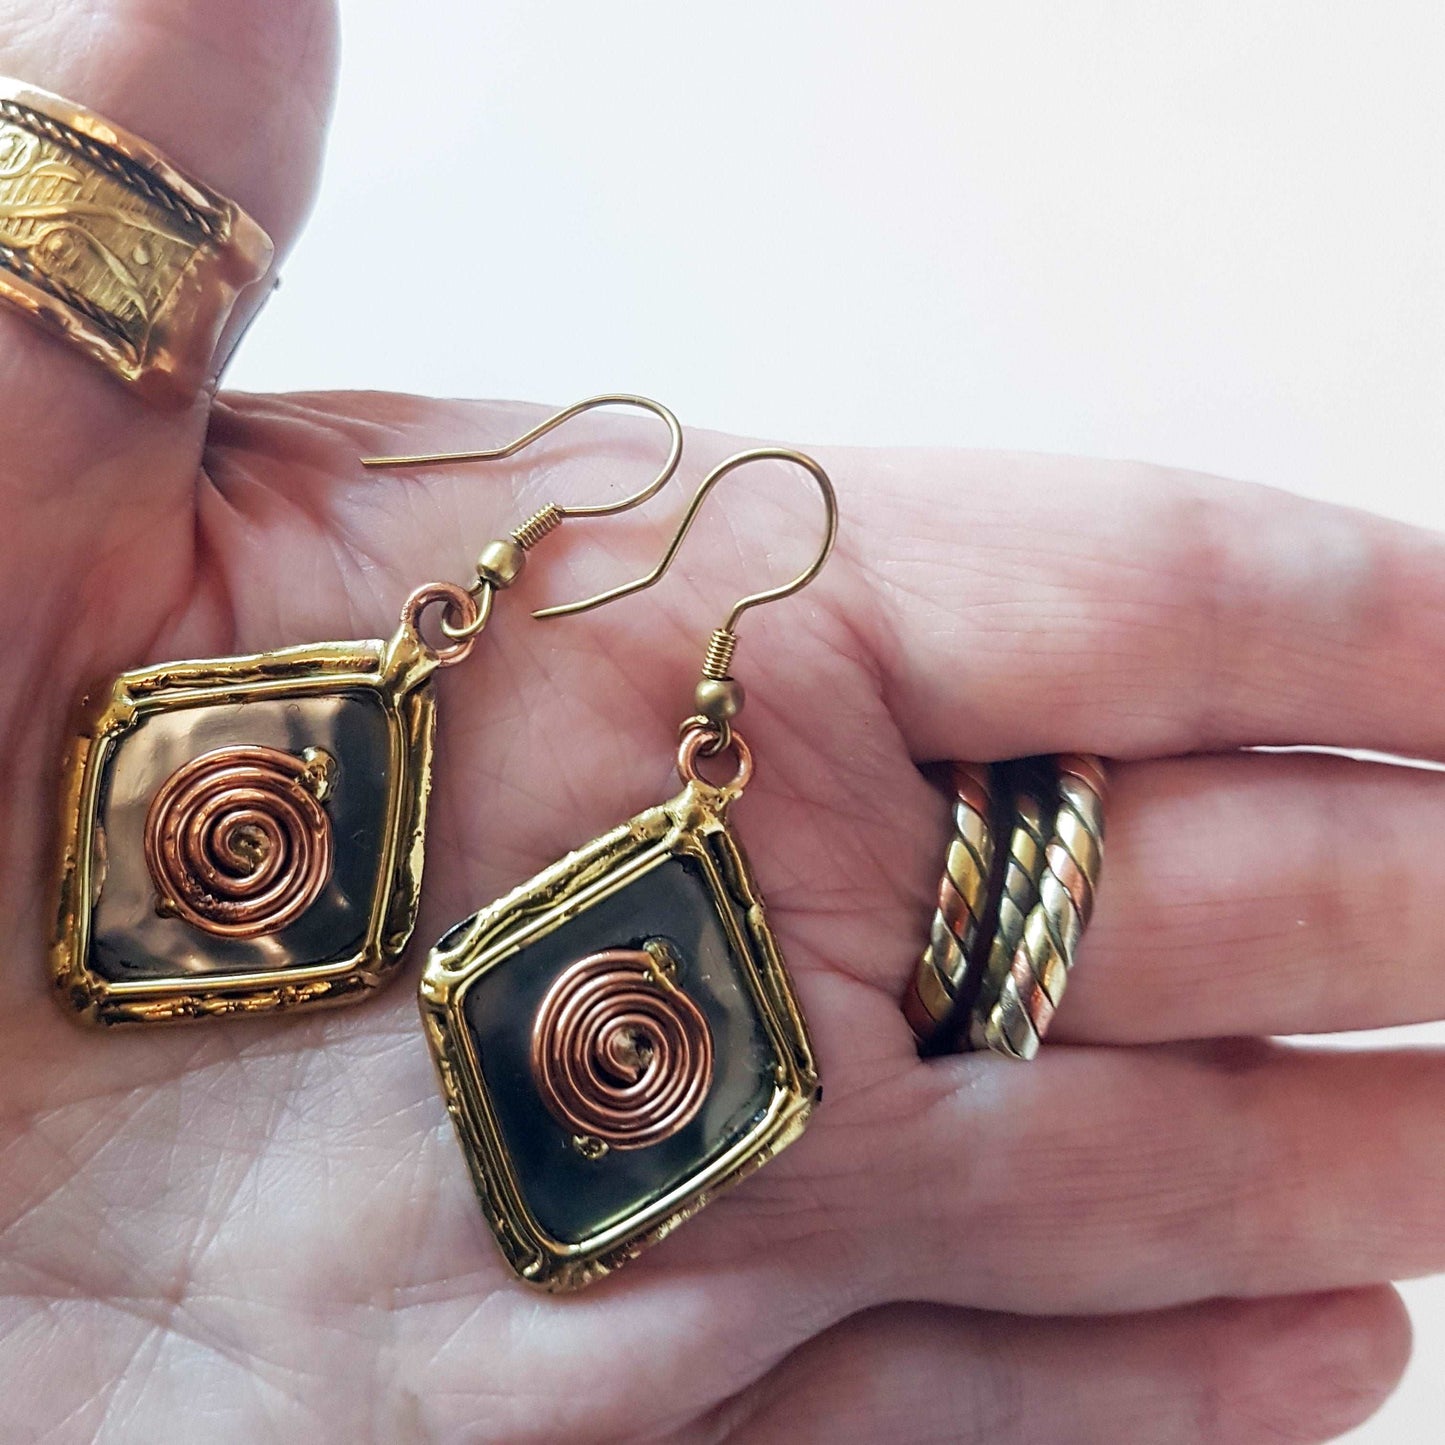 Celtic silver earrings in a diamond shape with gold and copper tone wirework detail.